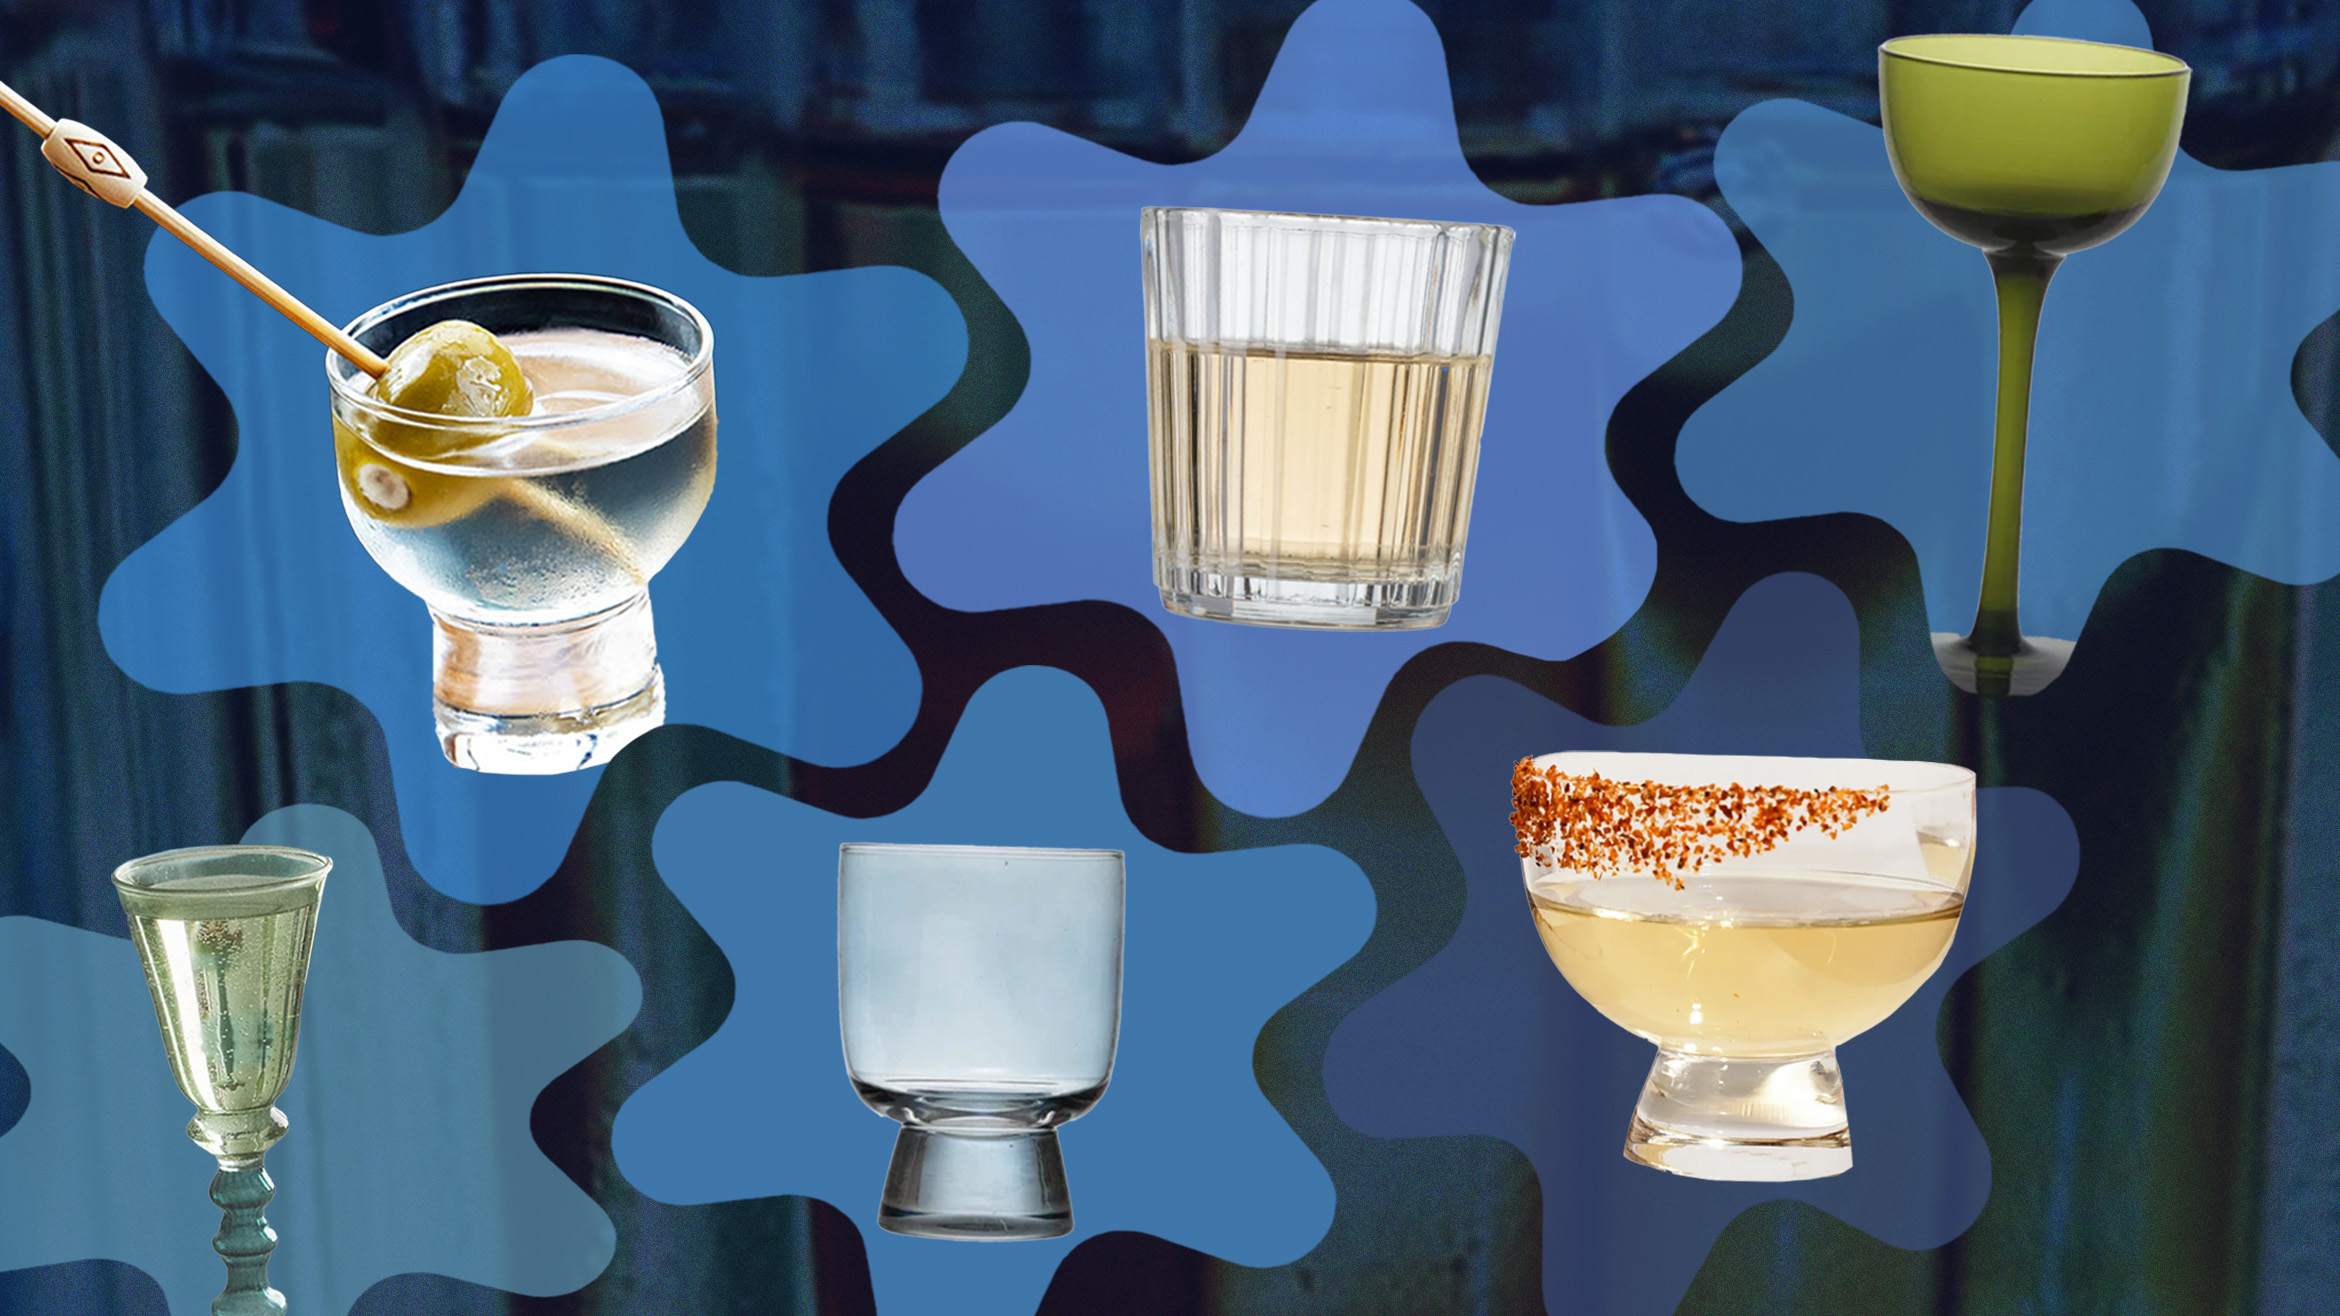 A collage of petite cocktail glasses, some of which contain cocktails